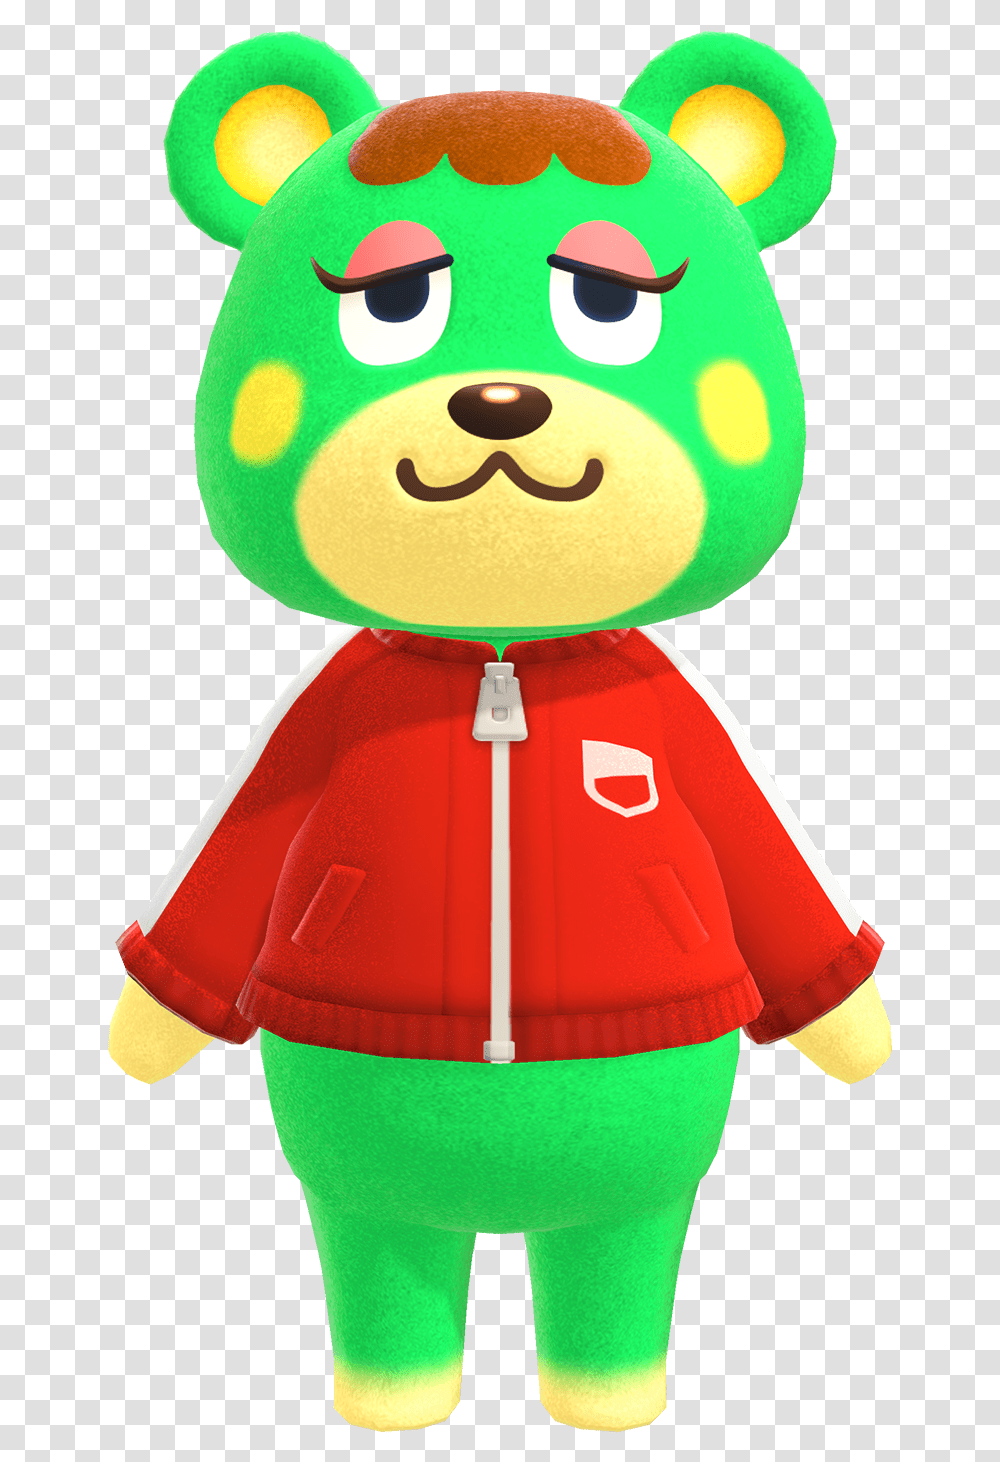 Charlise Animal Crossing Wiki Nookipedia Charlise Animal Crossing, Clothing, Apparel, Doll, Toy Transparent Png